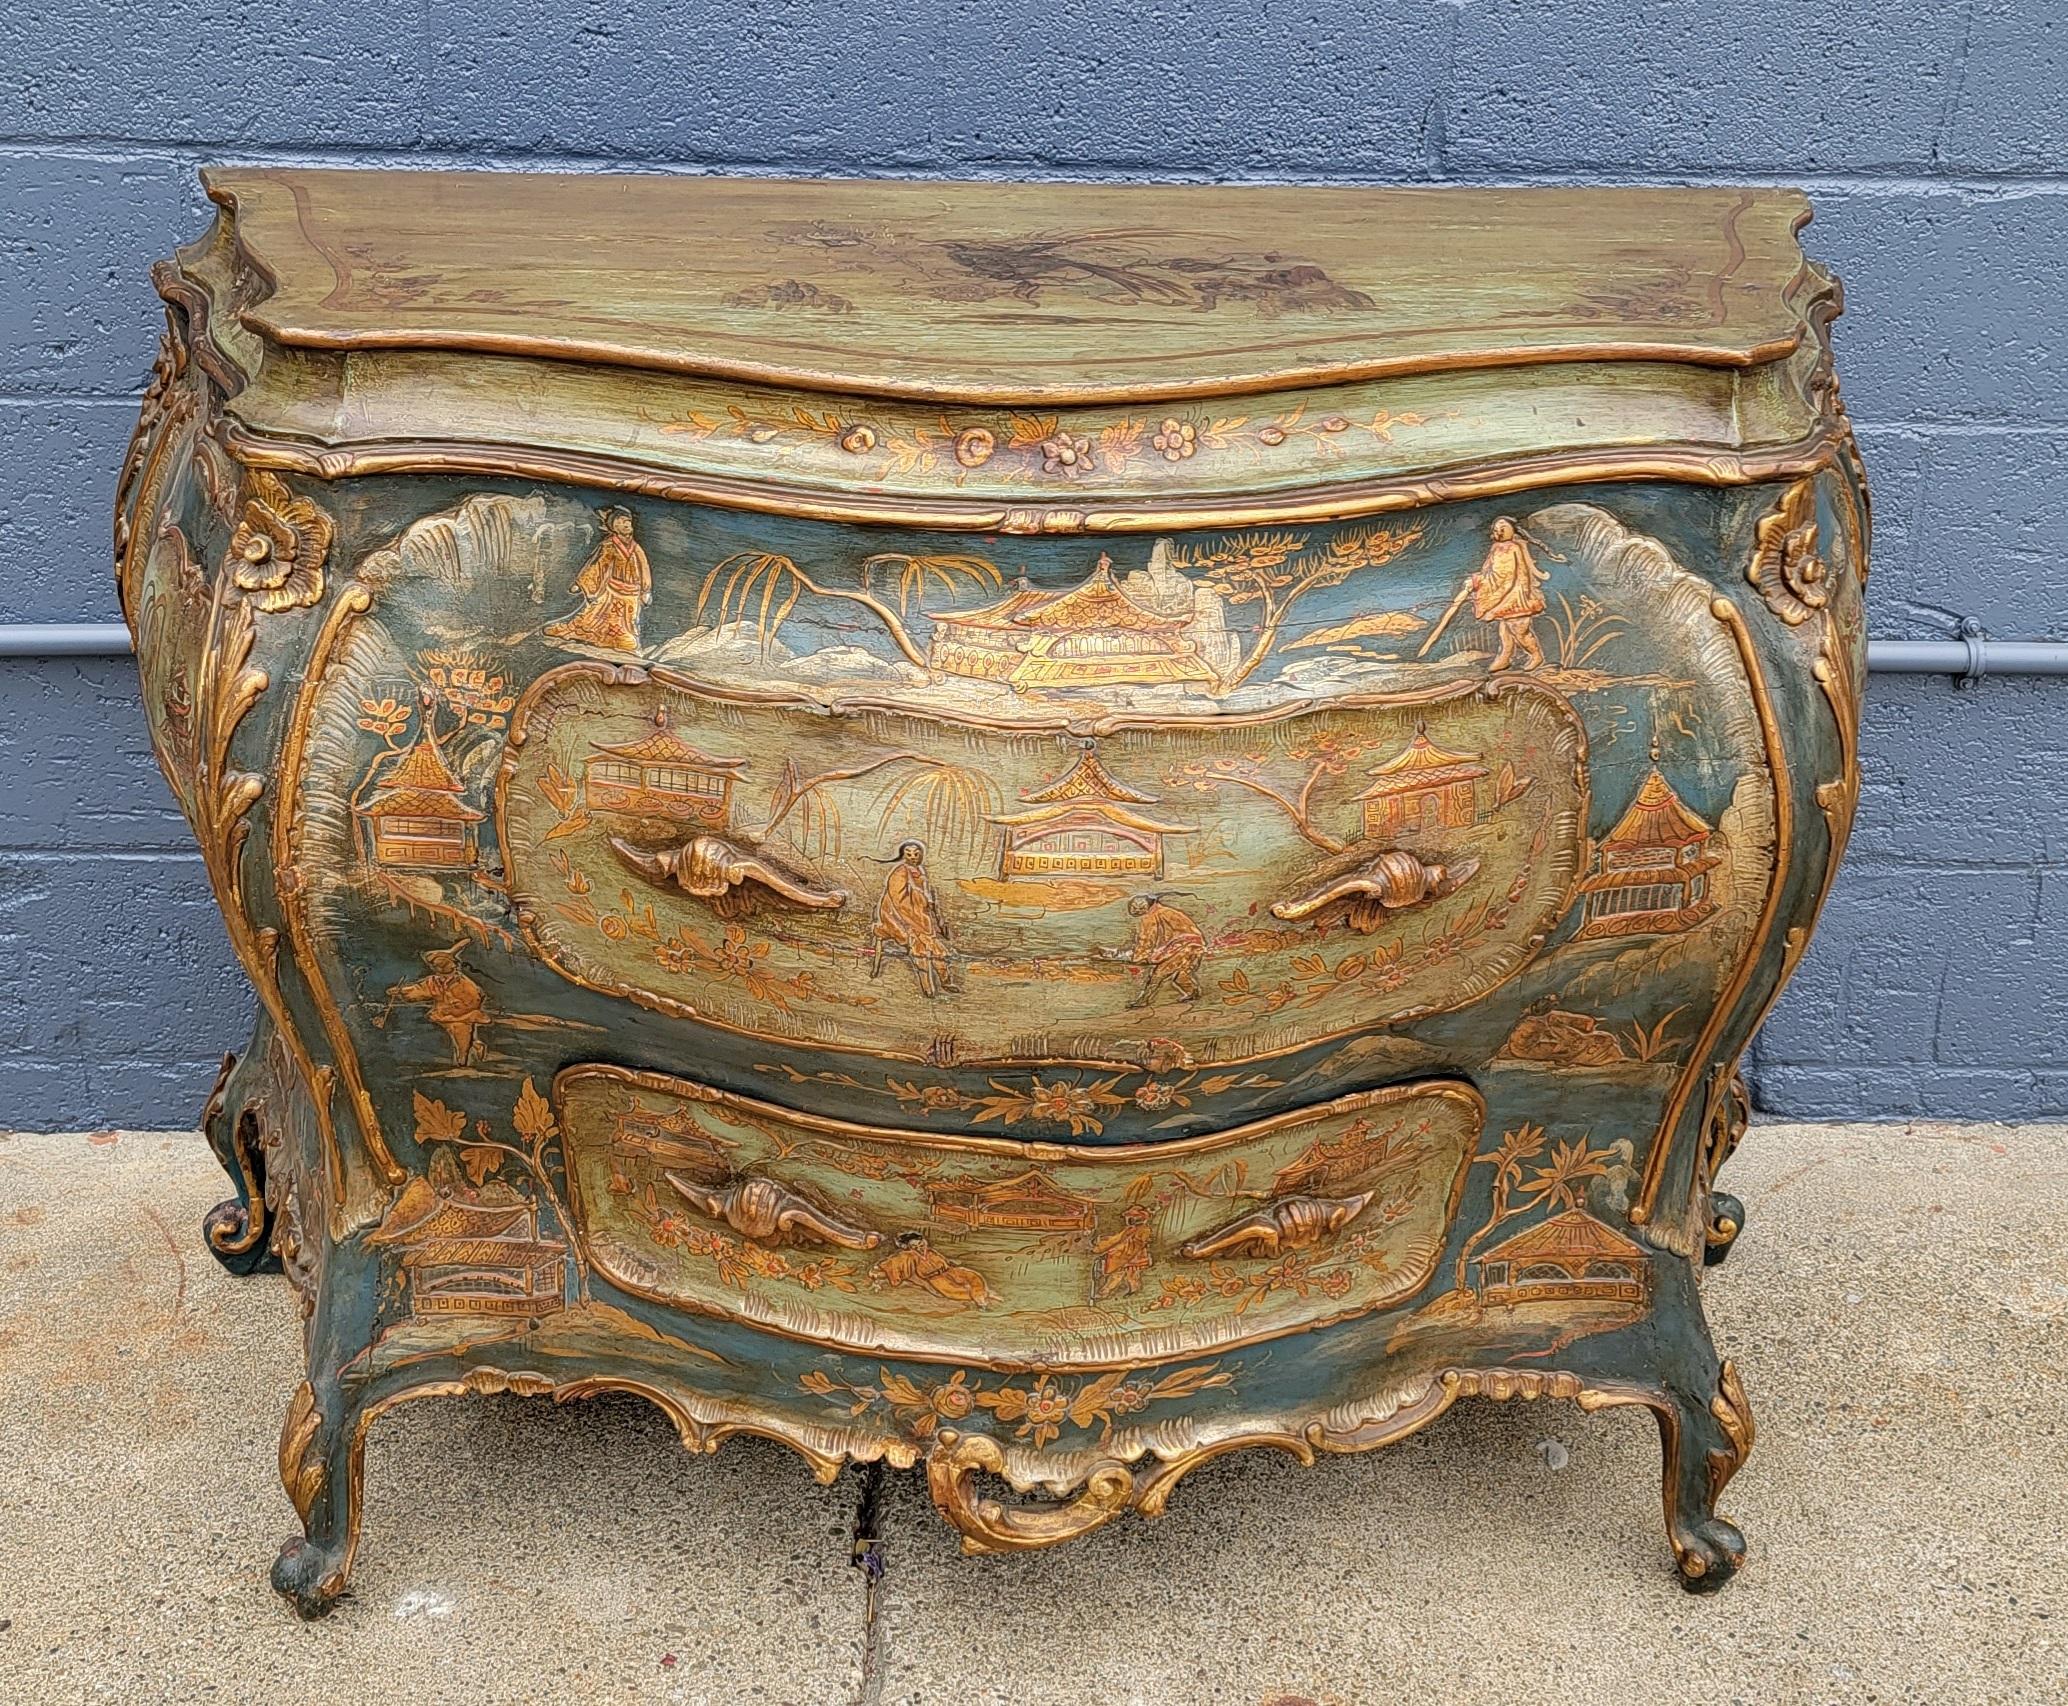 18th century Italian commode embellished with hand lacquered chinoiserie detail. Over-exaggerated Bombe form with warm blue, green and gold tones. Retains original 18th century chinoiserie lacquer decoration and original carcass. As this piece has